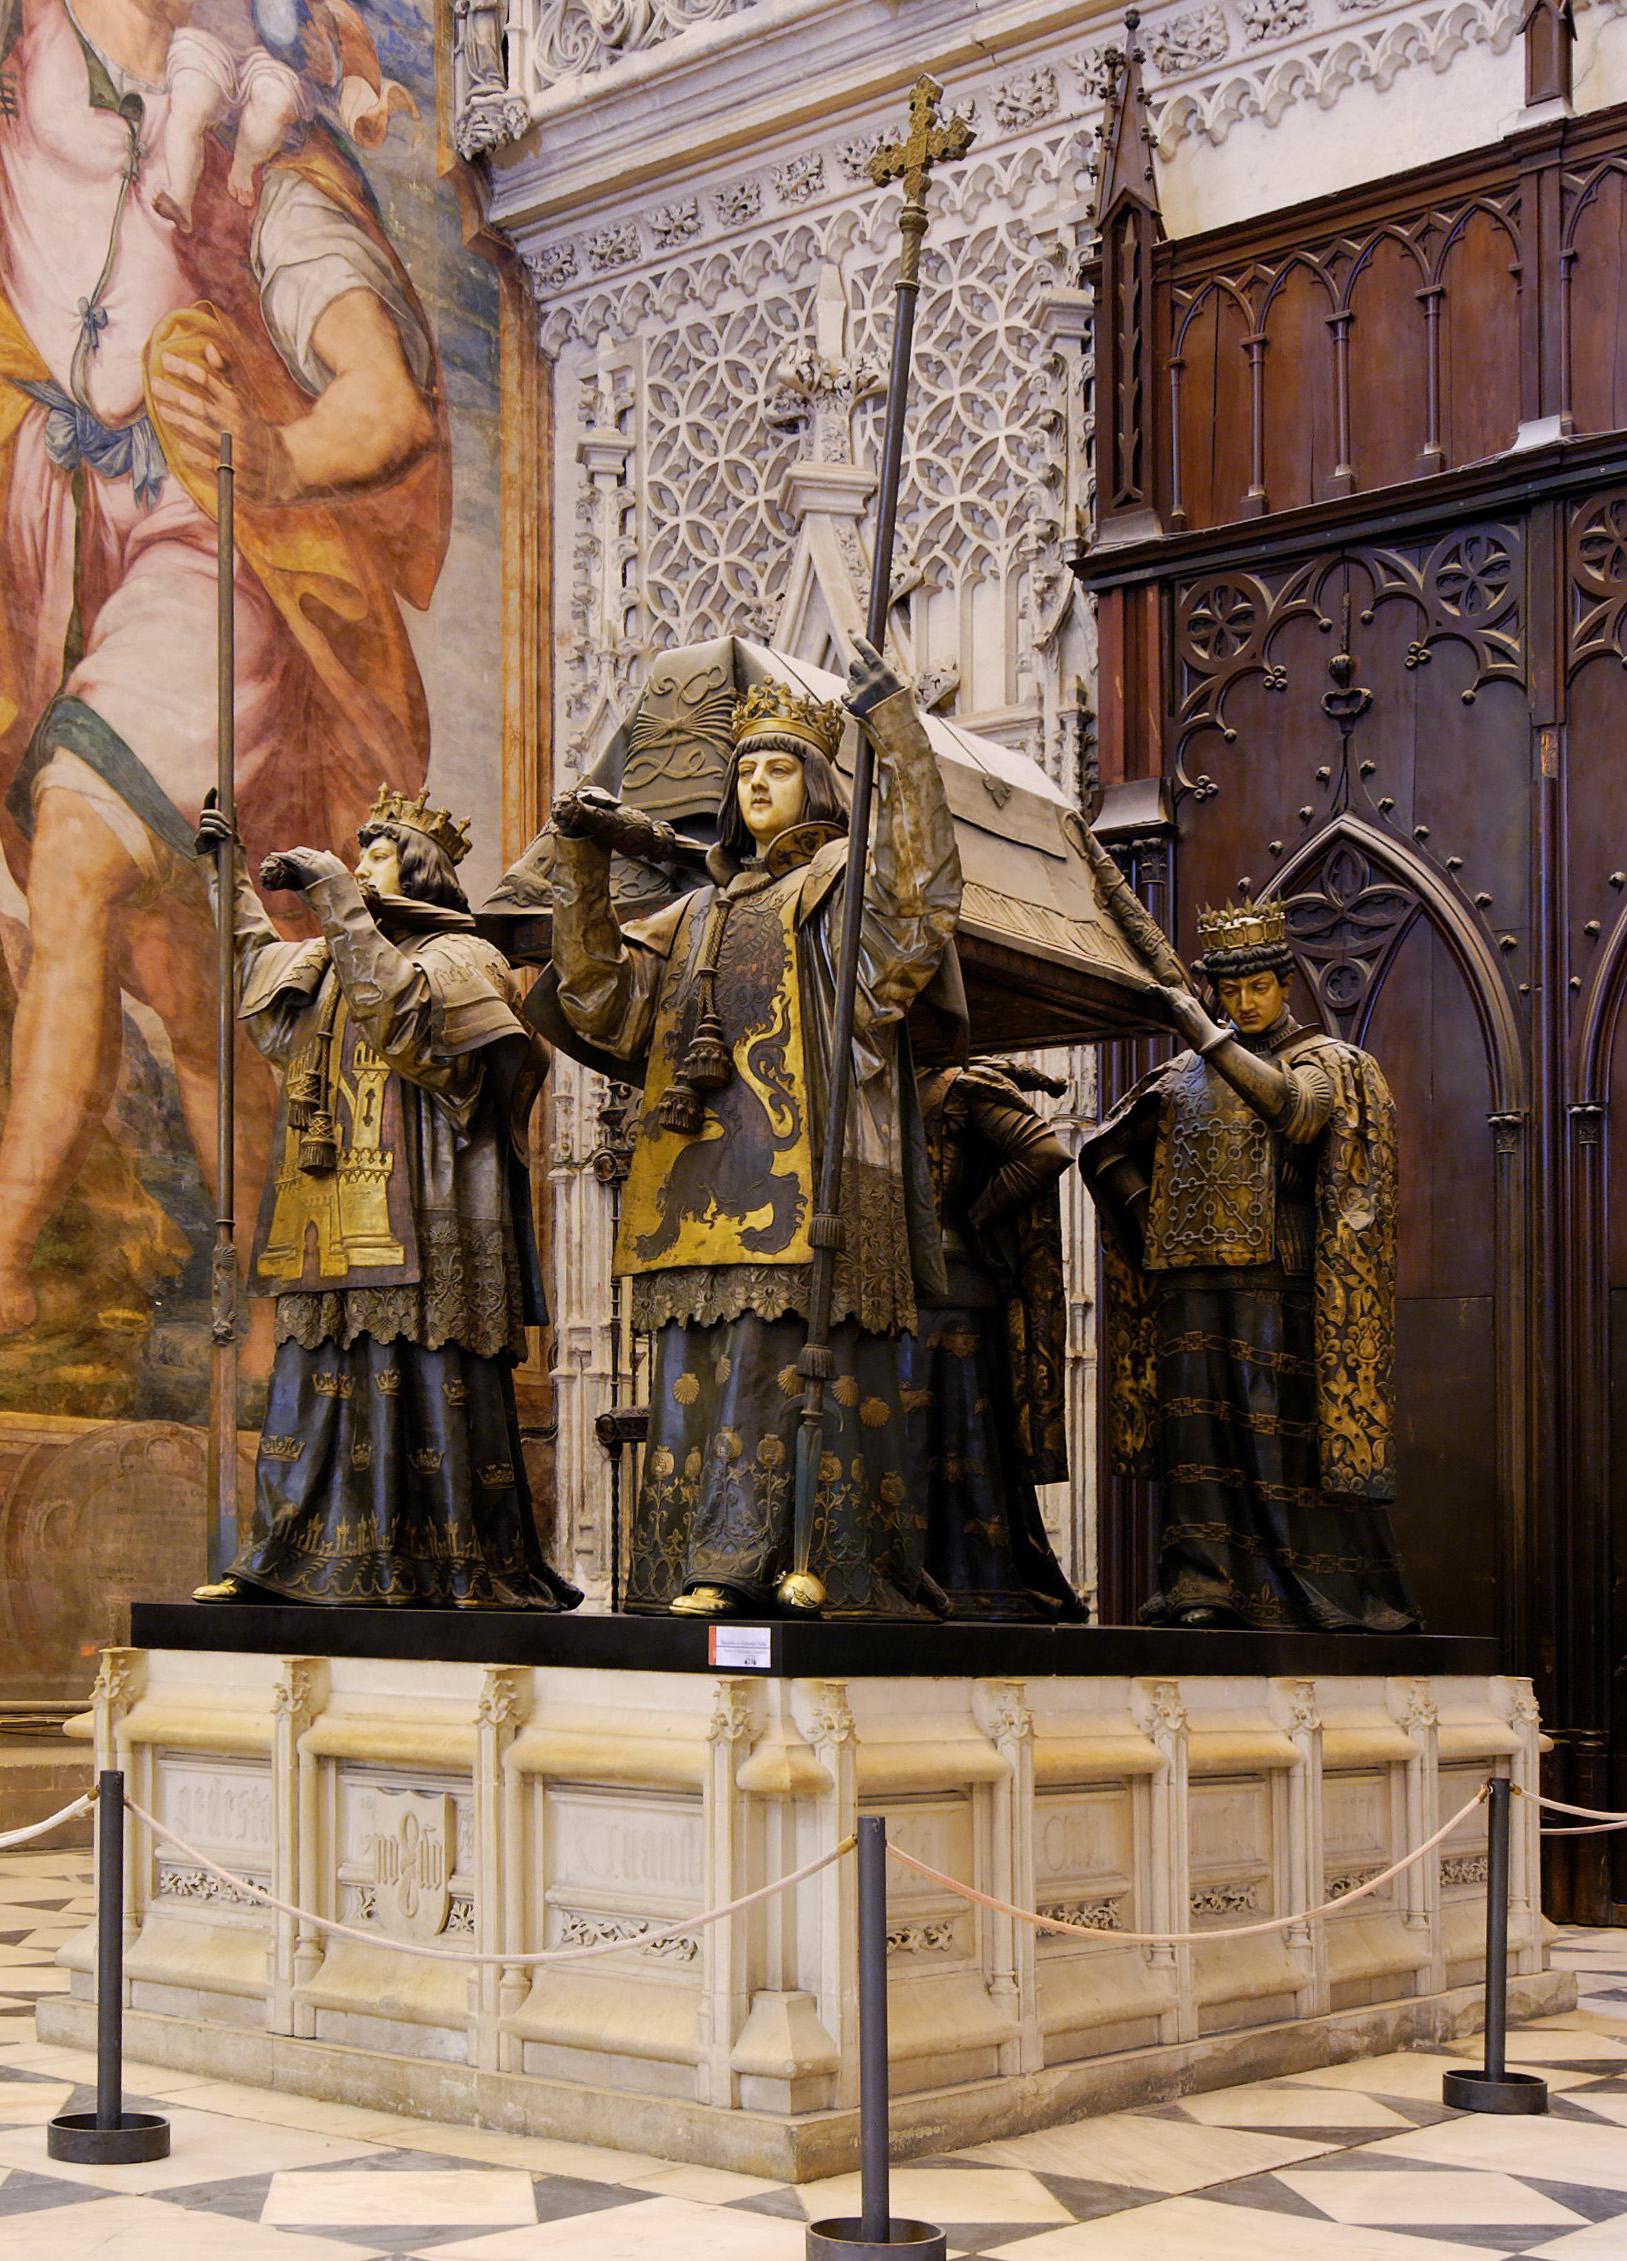 The tombs of Christopher Columbus in Seville and Santo Domingo.